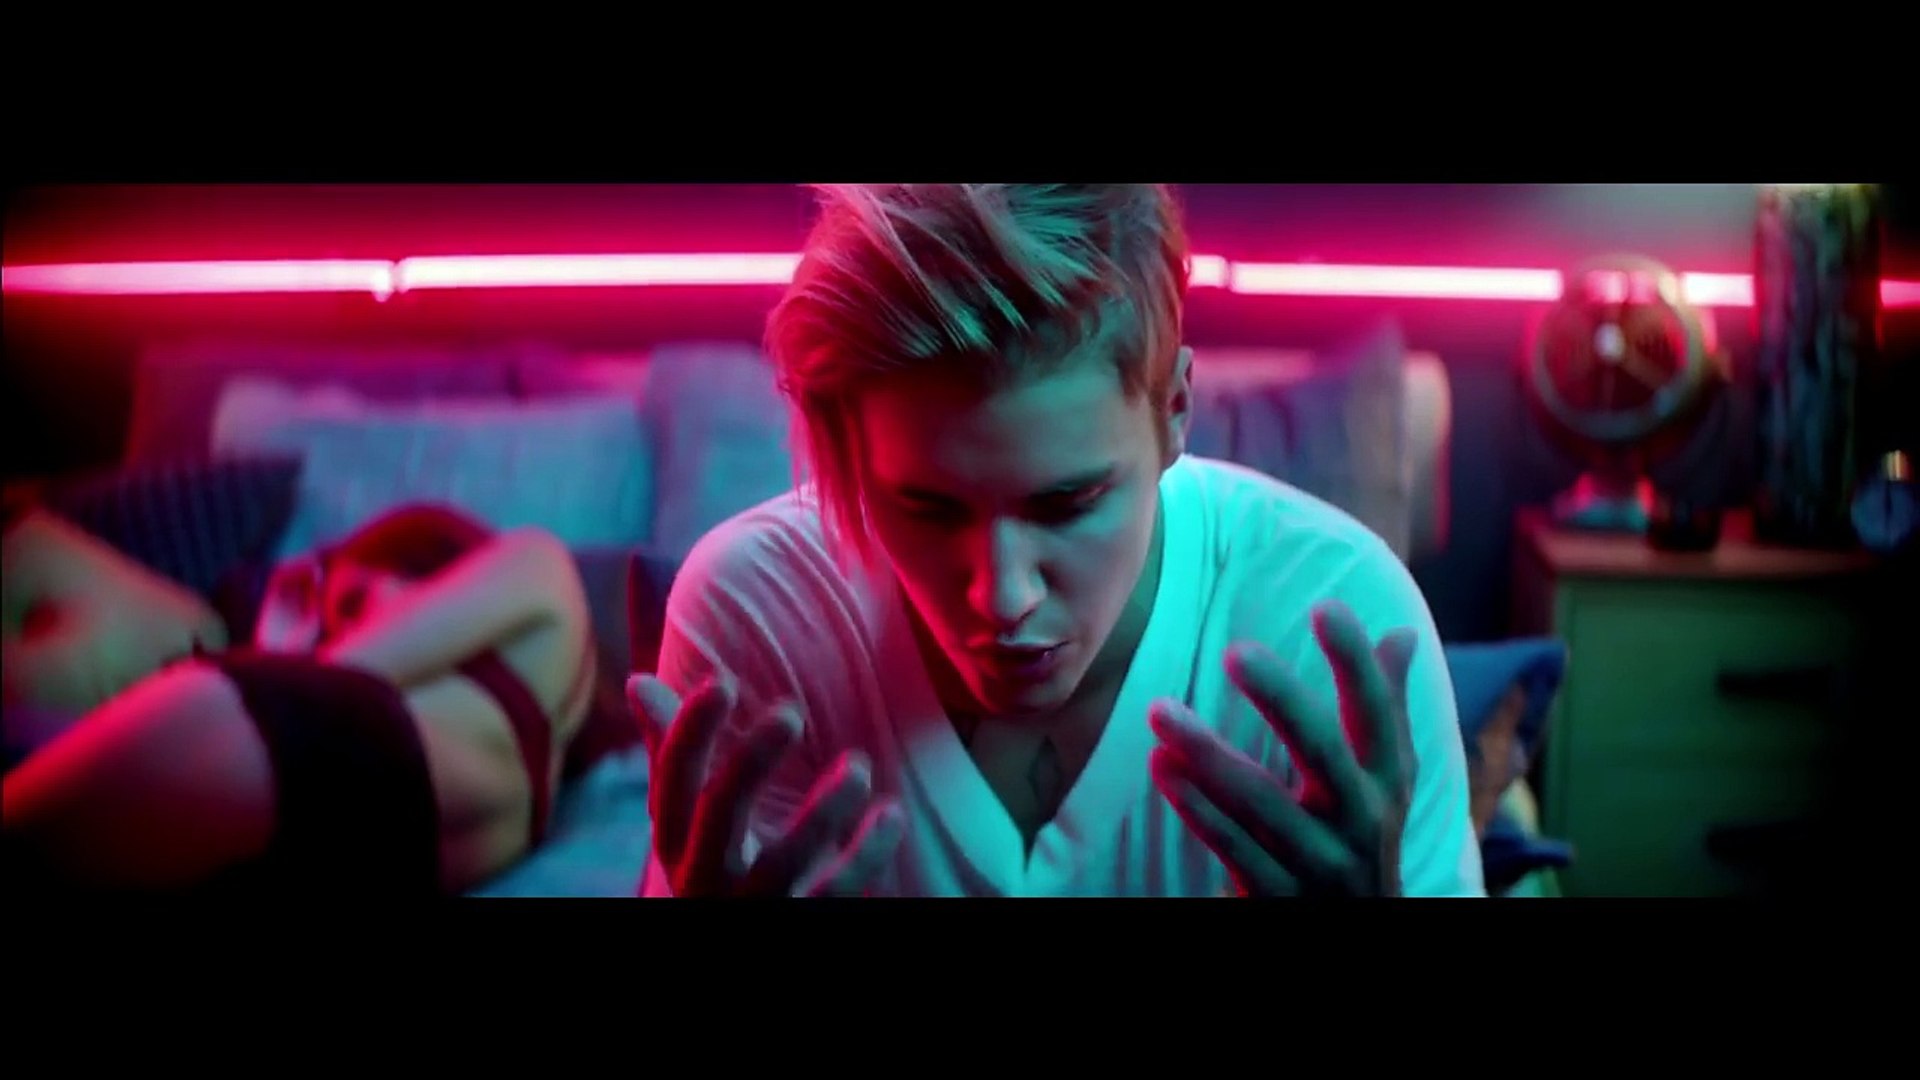 What Do You Mean Music Video